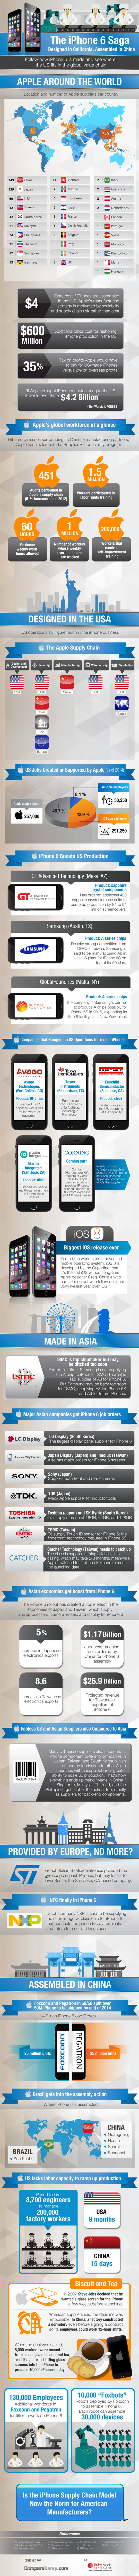 Where Are iPhones Made: Comparison Of Countries That Manufacture Apple's Smartphone